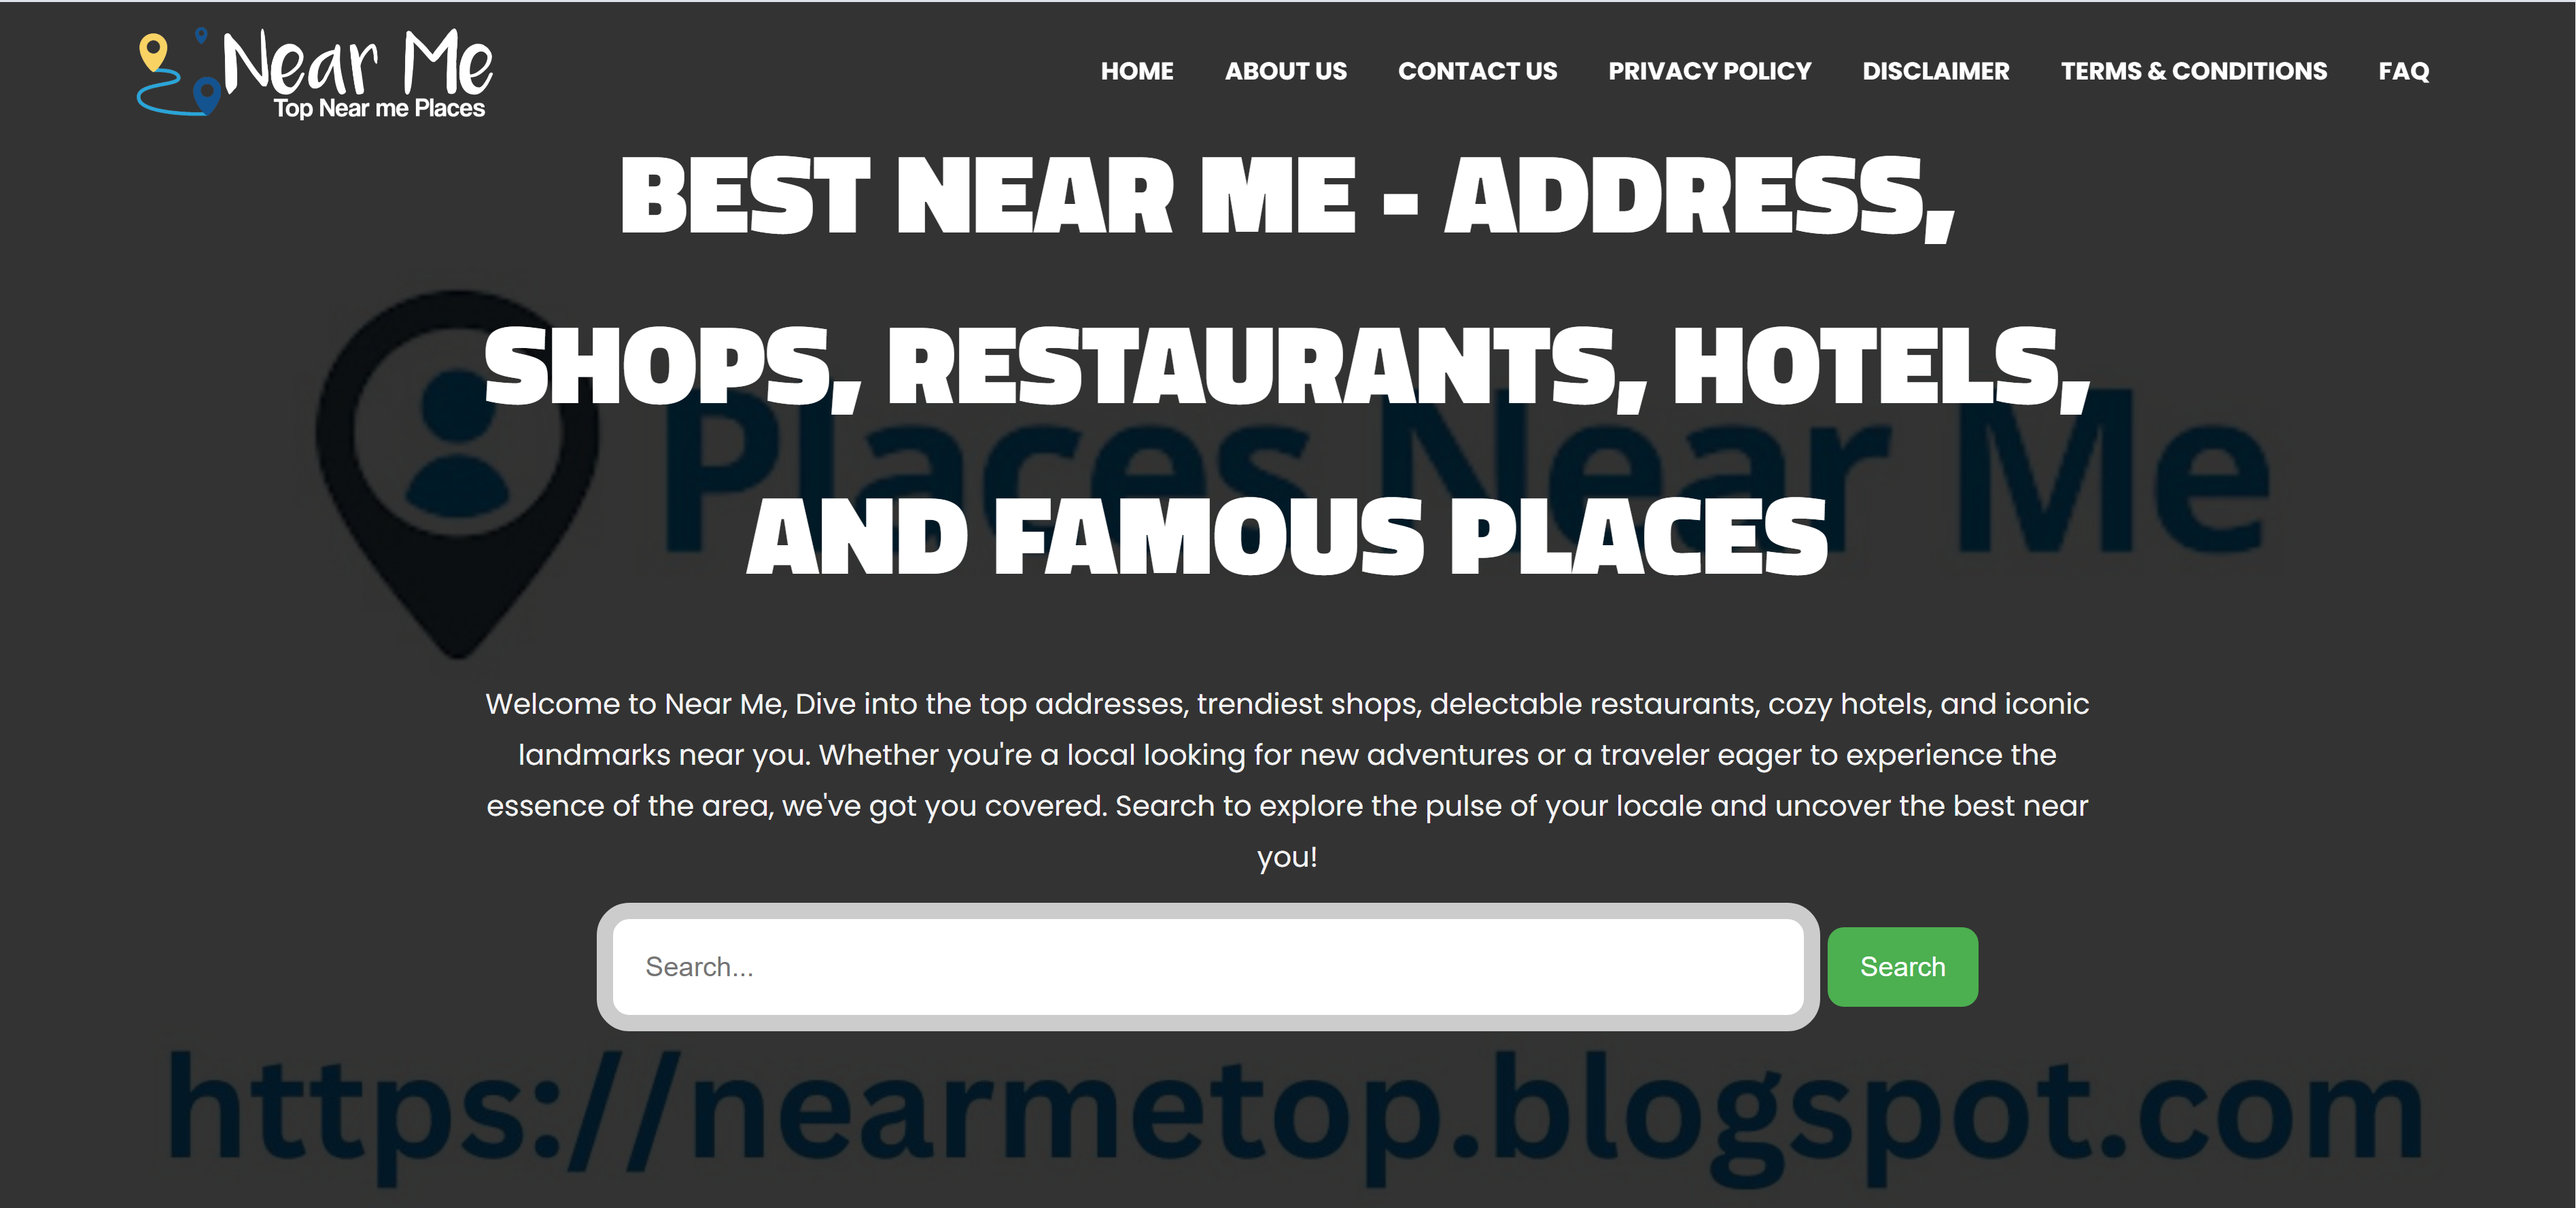 Near Me Theme by Haider Khan: A Premium Solution for Lightning-Fast Blogger Sites